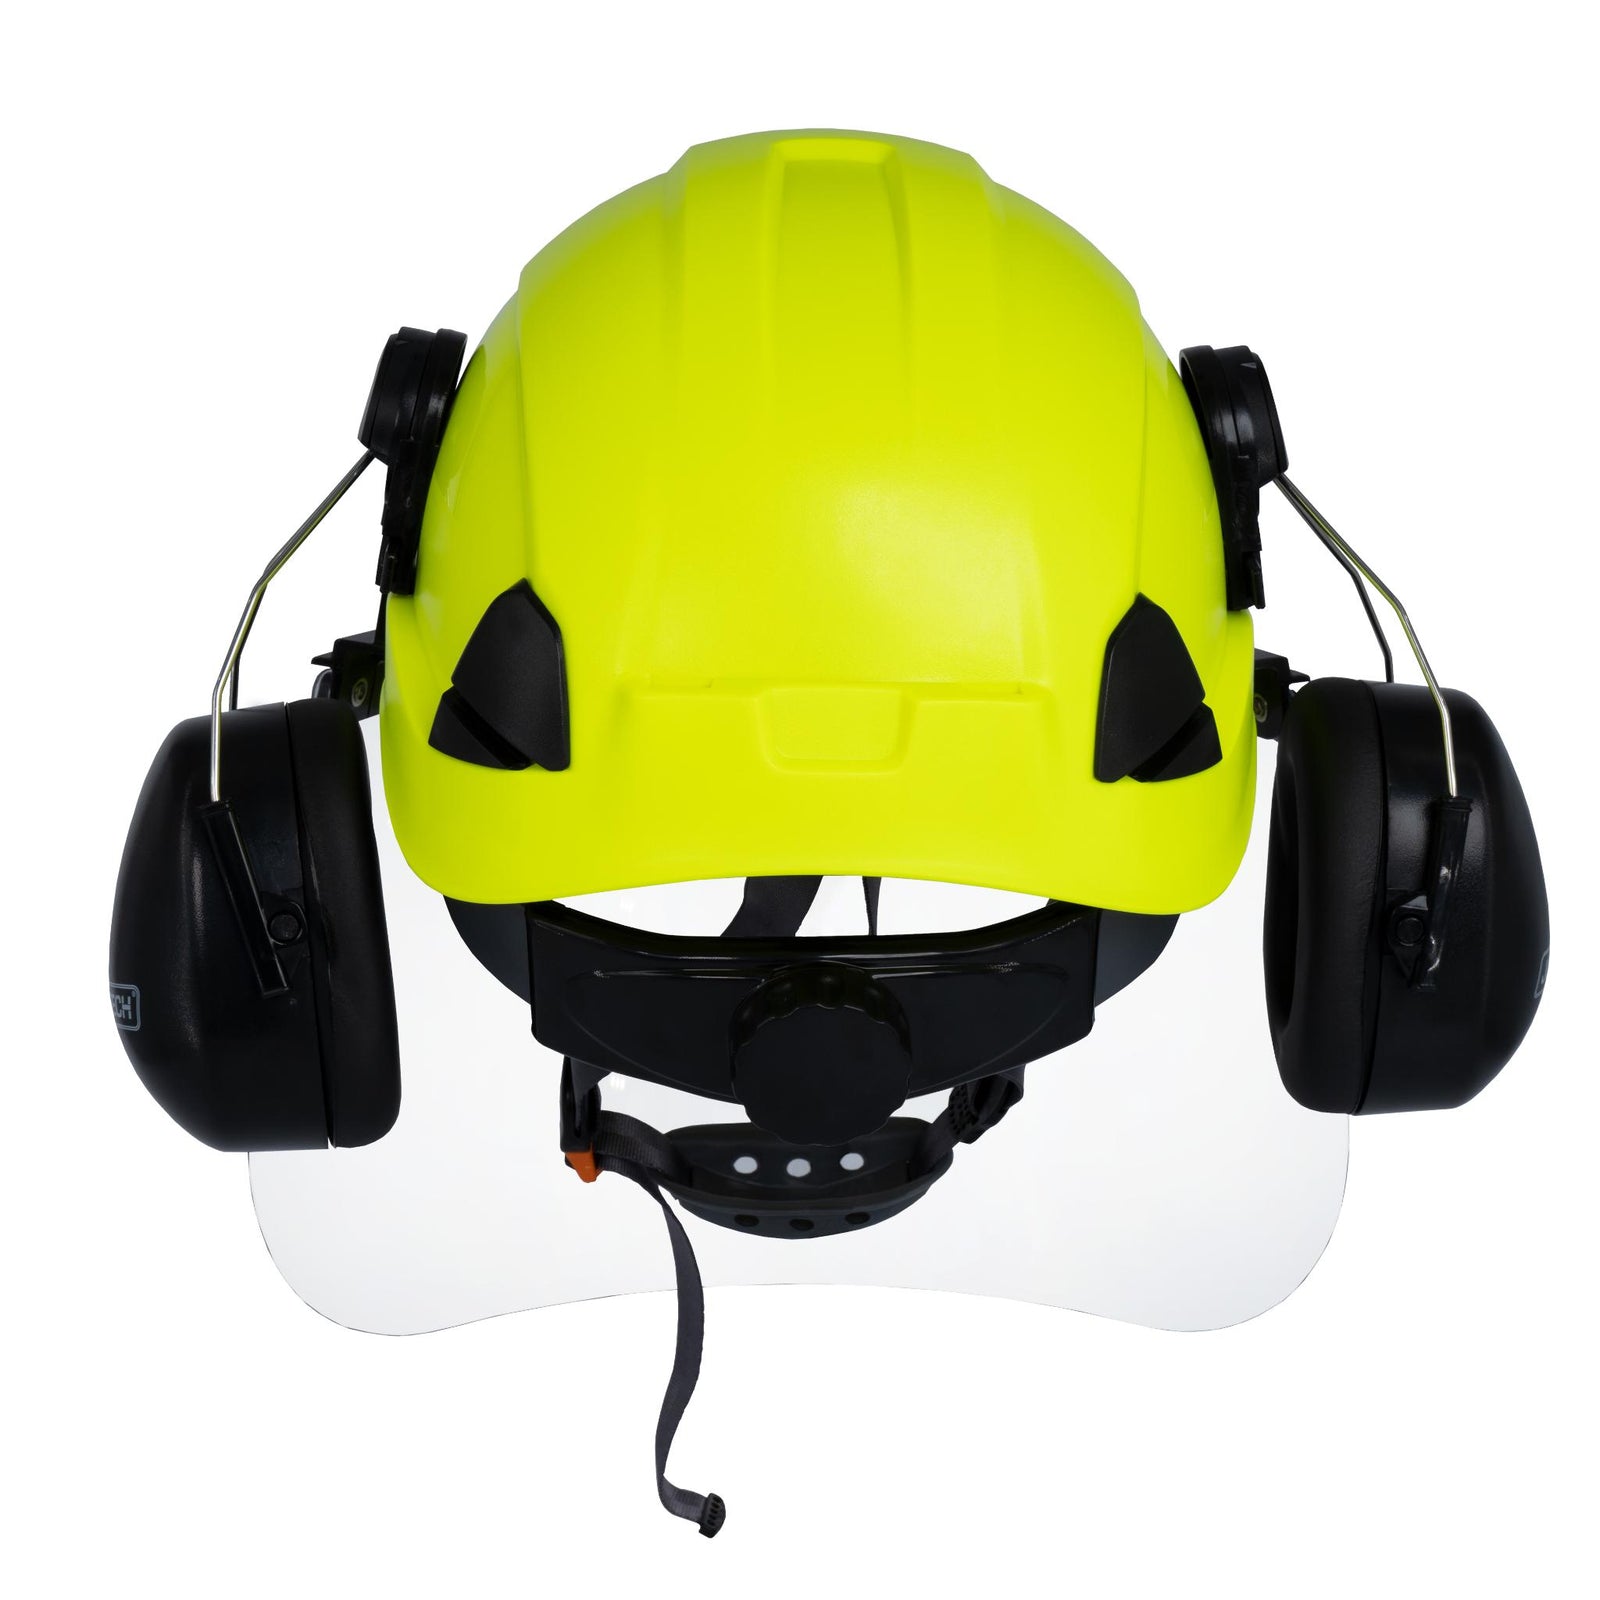 Back view of the JORESTECH orange 3-in-1 helmet system with mountable face shield and earmuffs